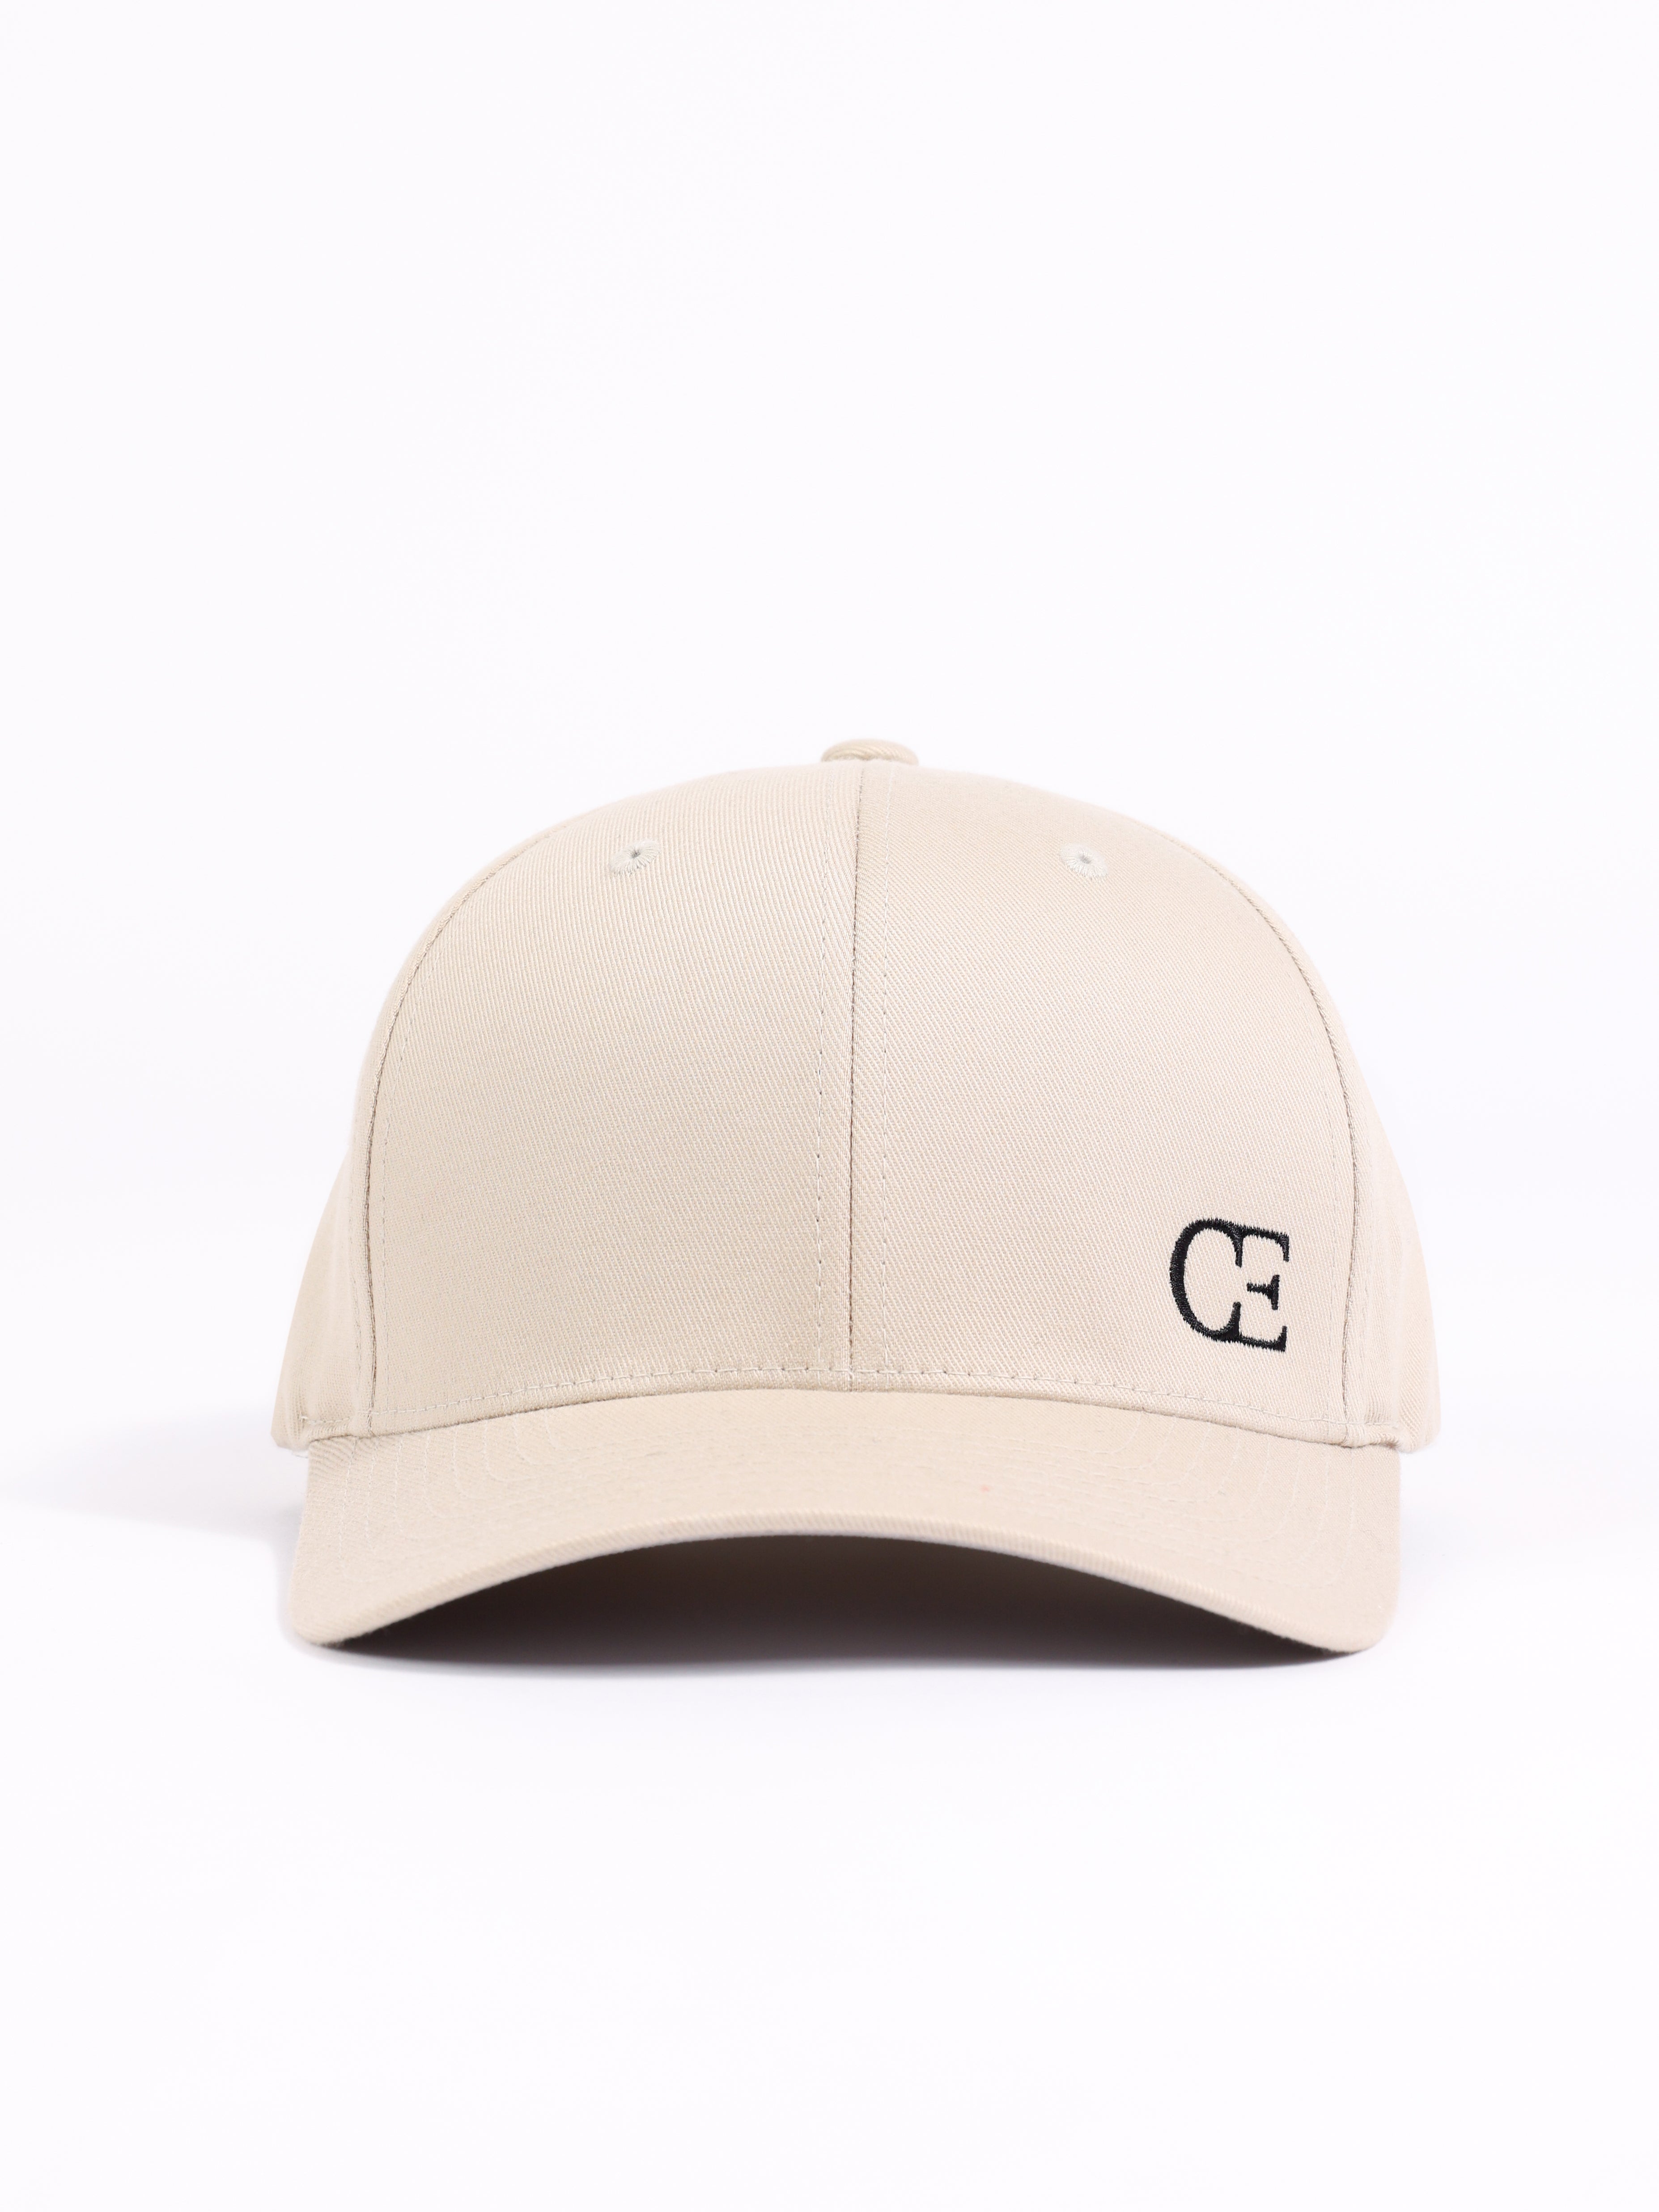 Stone urban classic hat with white background |Color:Stone/Black